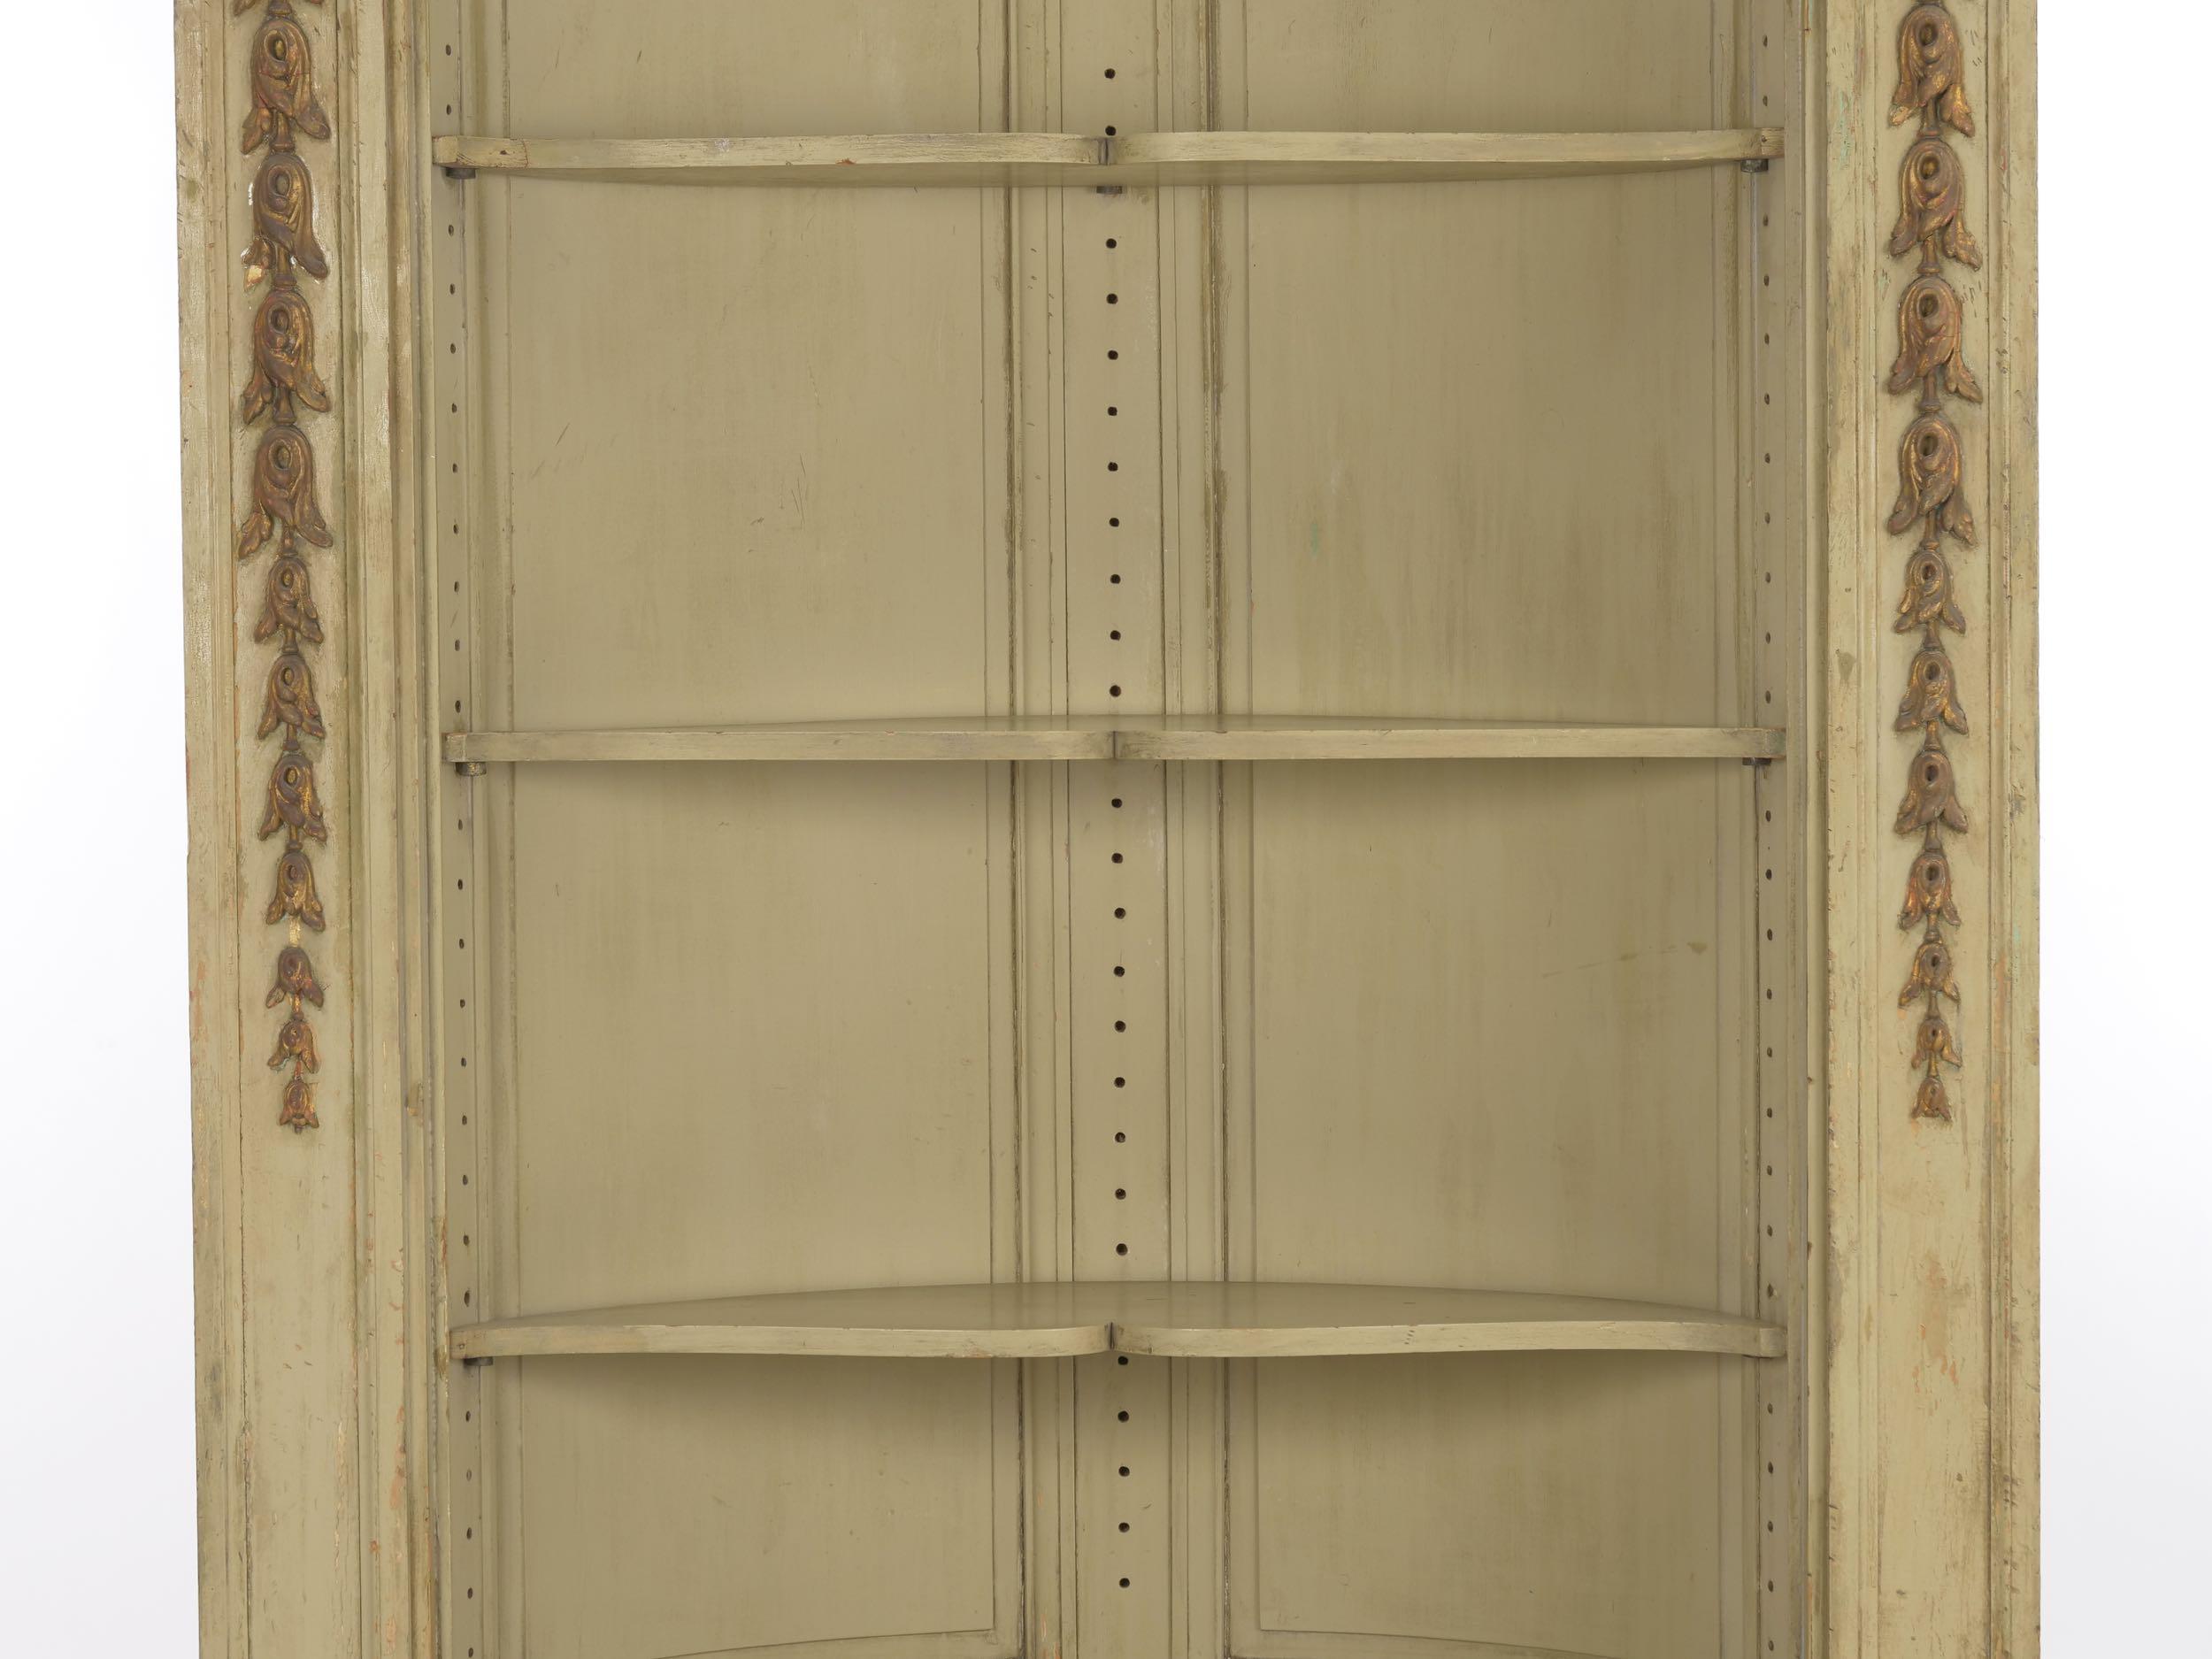 19th Century Neoclassical Painted Built-In Antique Corner Cupboard Cabinet In Good Condition For Sale In Shippensburg, PA